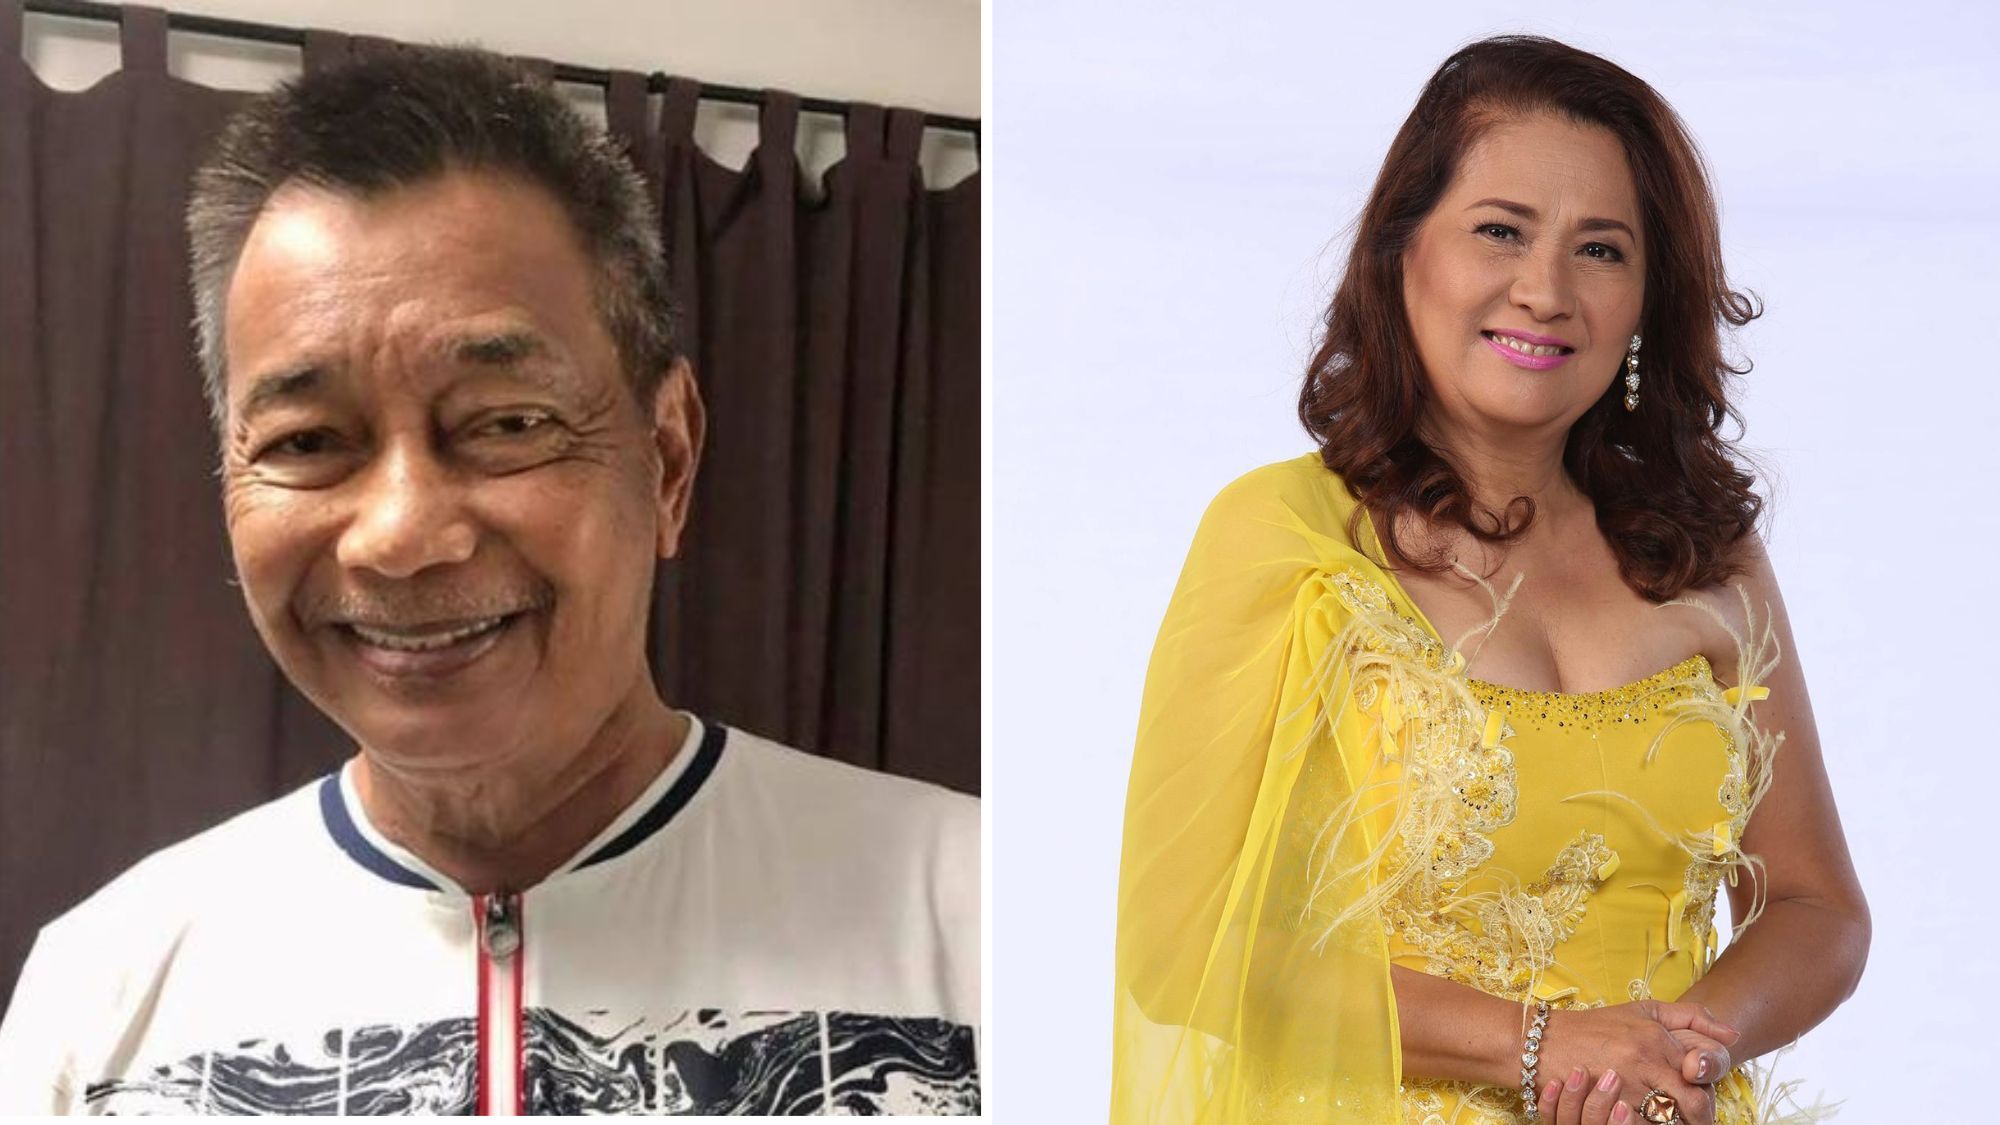 Tessie Tomas remembers last moments with Danny Javier